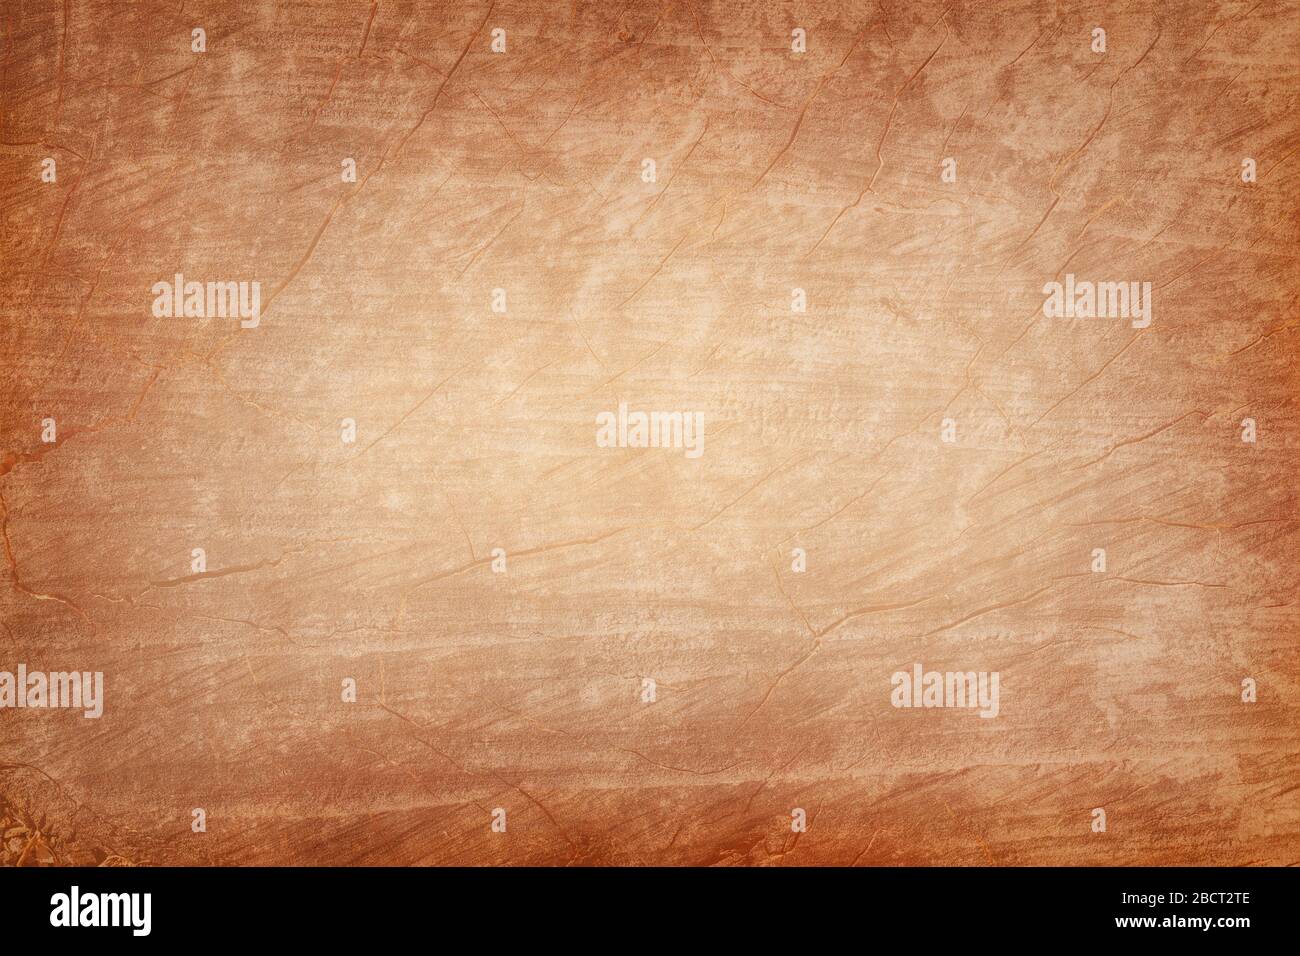 Vintage light brown colored damaged texture background for your text or prints Stock Photo